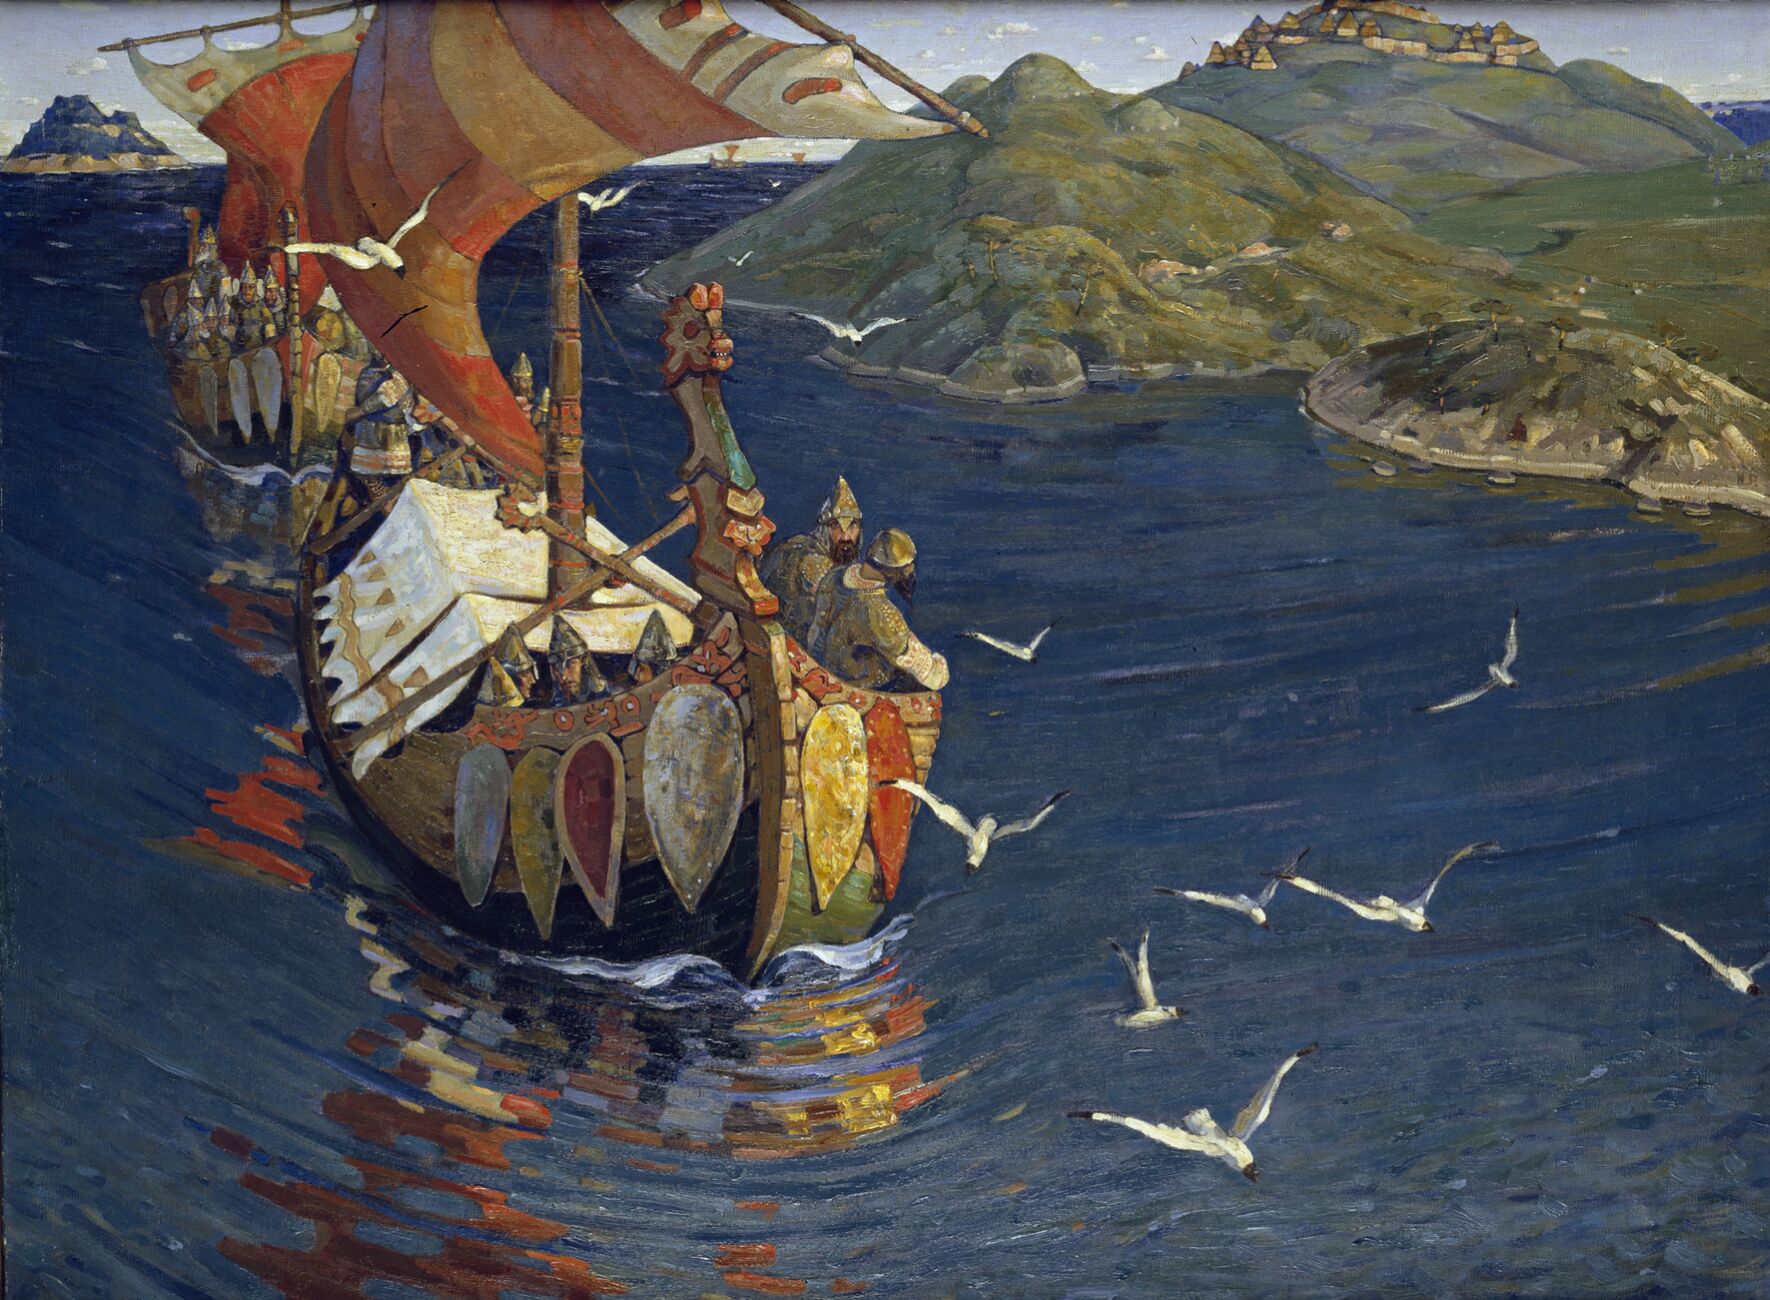 Nicholas Roerich/Guests from Overseas